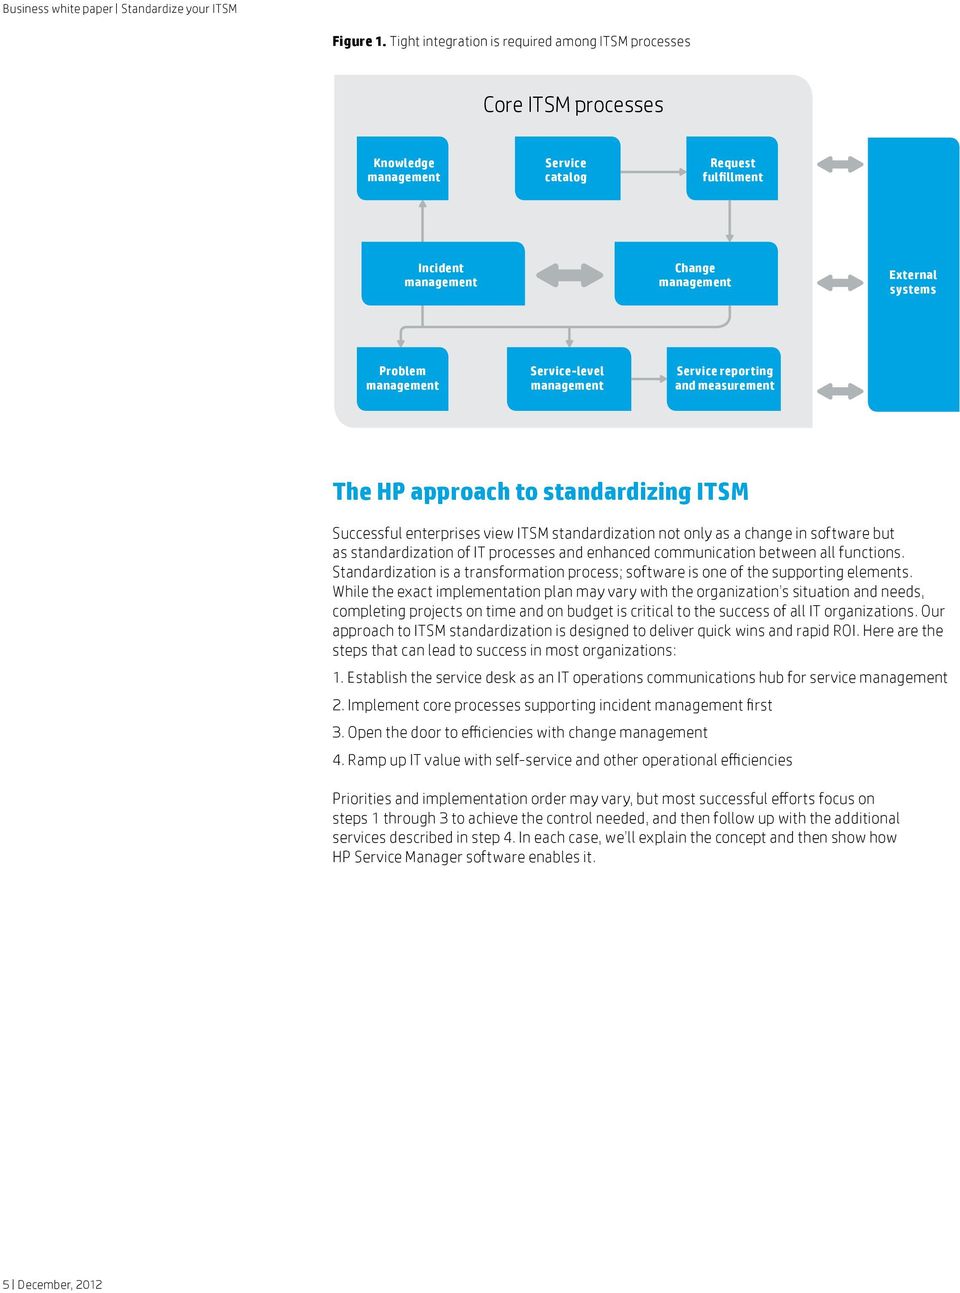 management Service-level management Service reporting and measurement The HP approach to standardizing ITSM Successful enterprises view ITSM standardization not only as a change in software but as